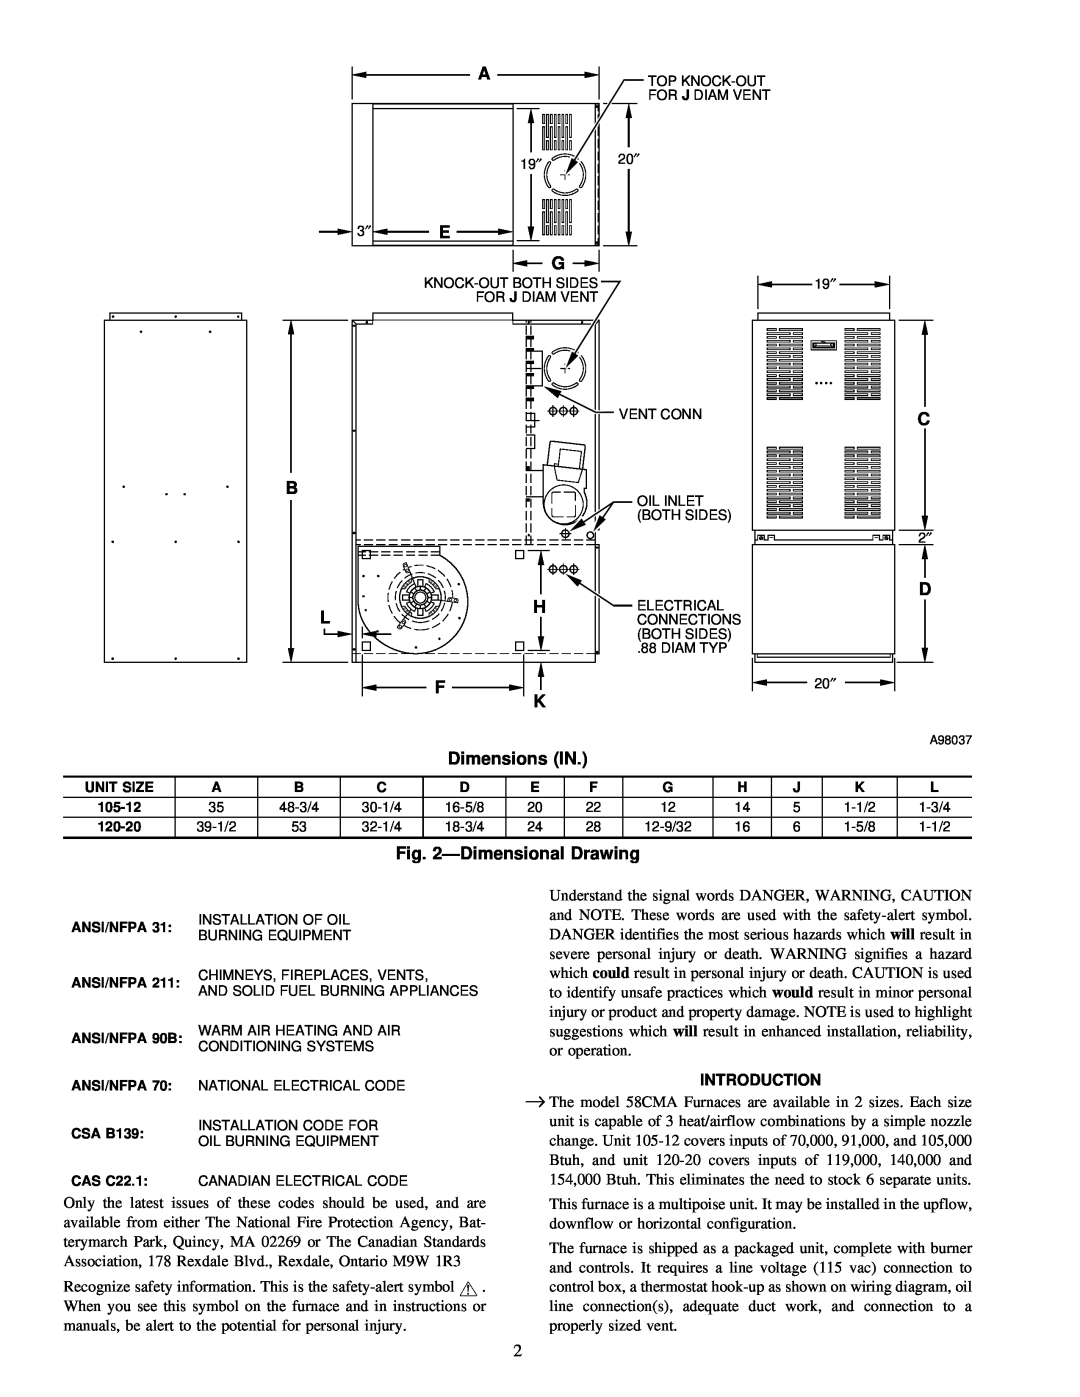 Carrier 58CMA instruction manual Dimensions IN, DimensionalDrawing 